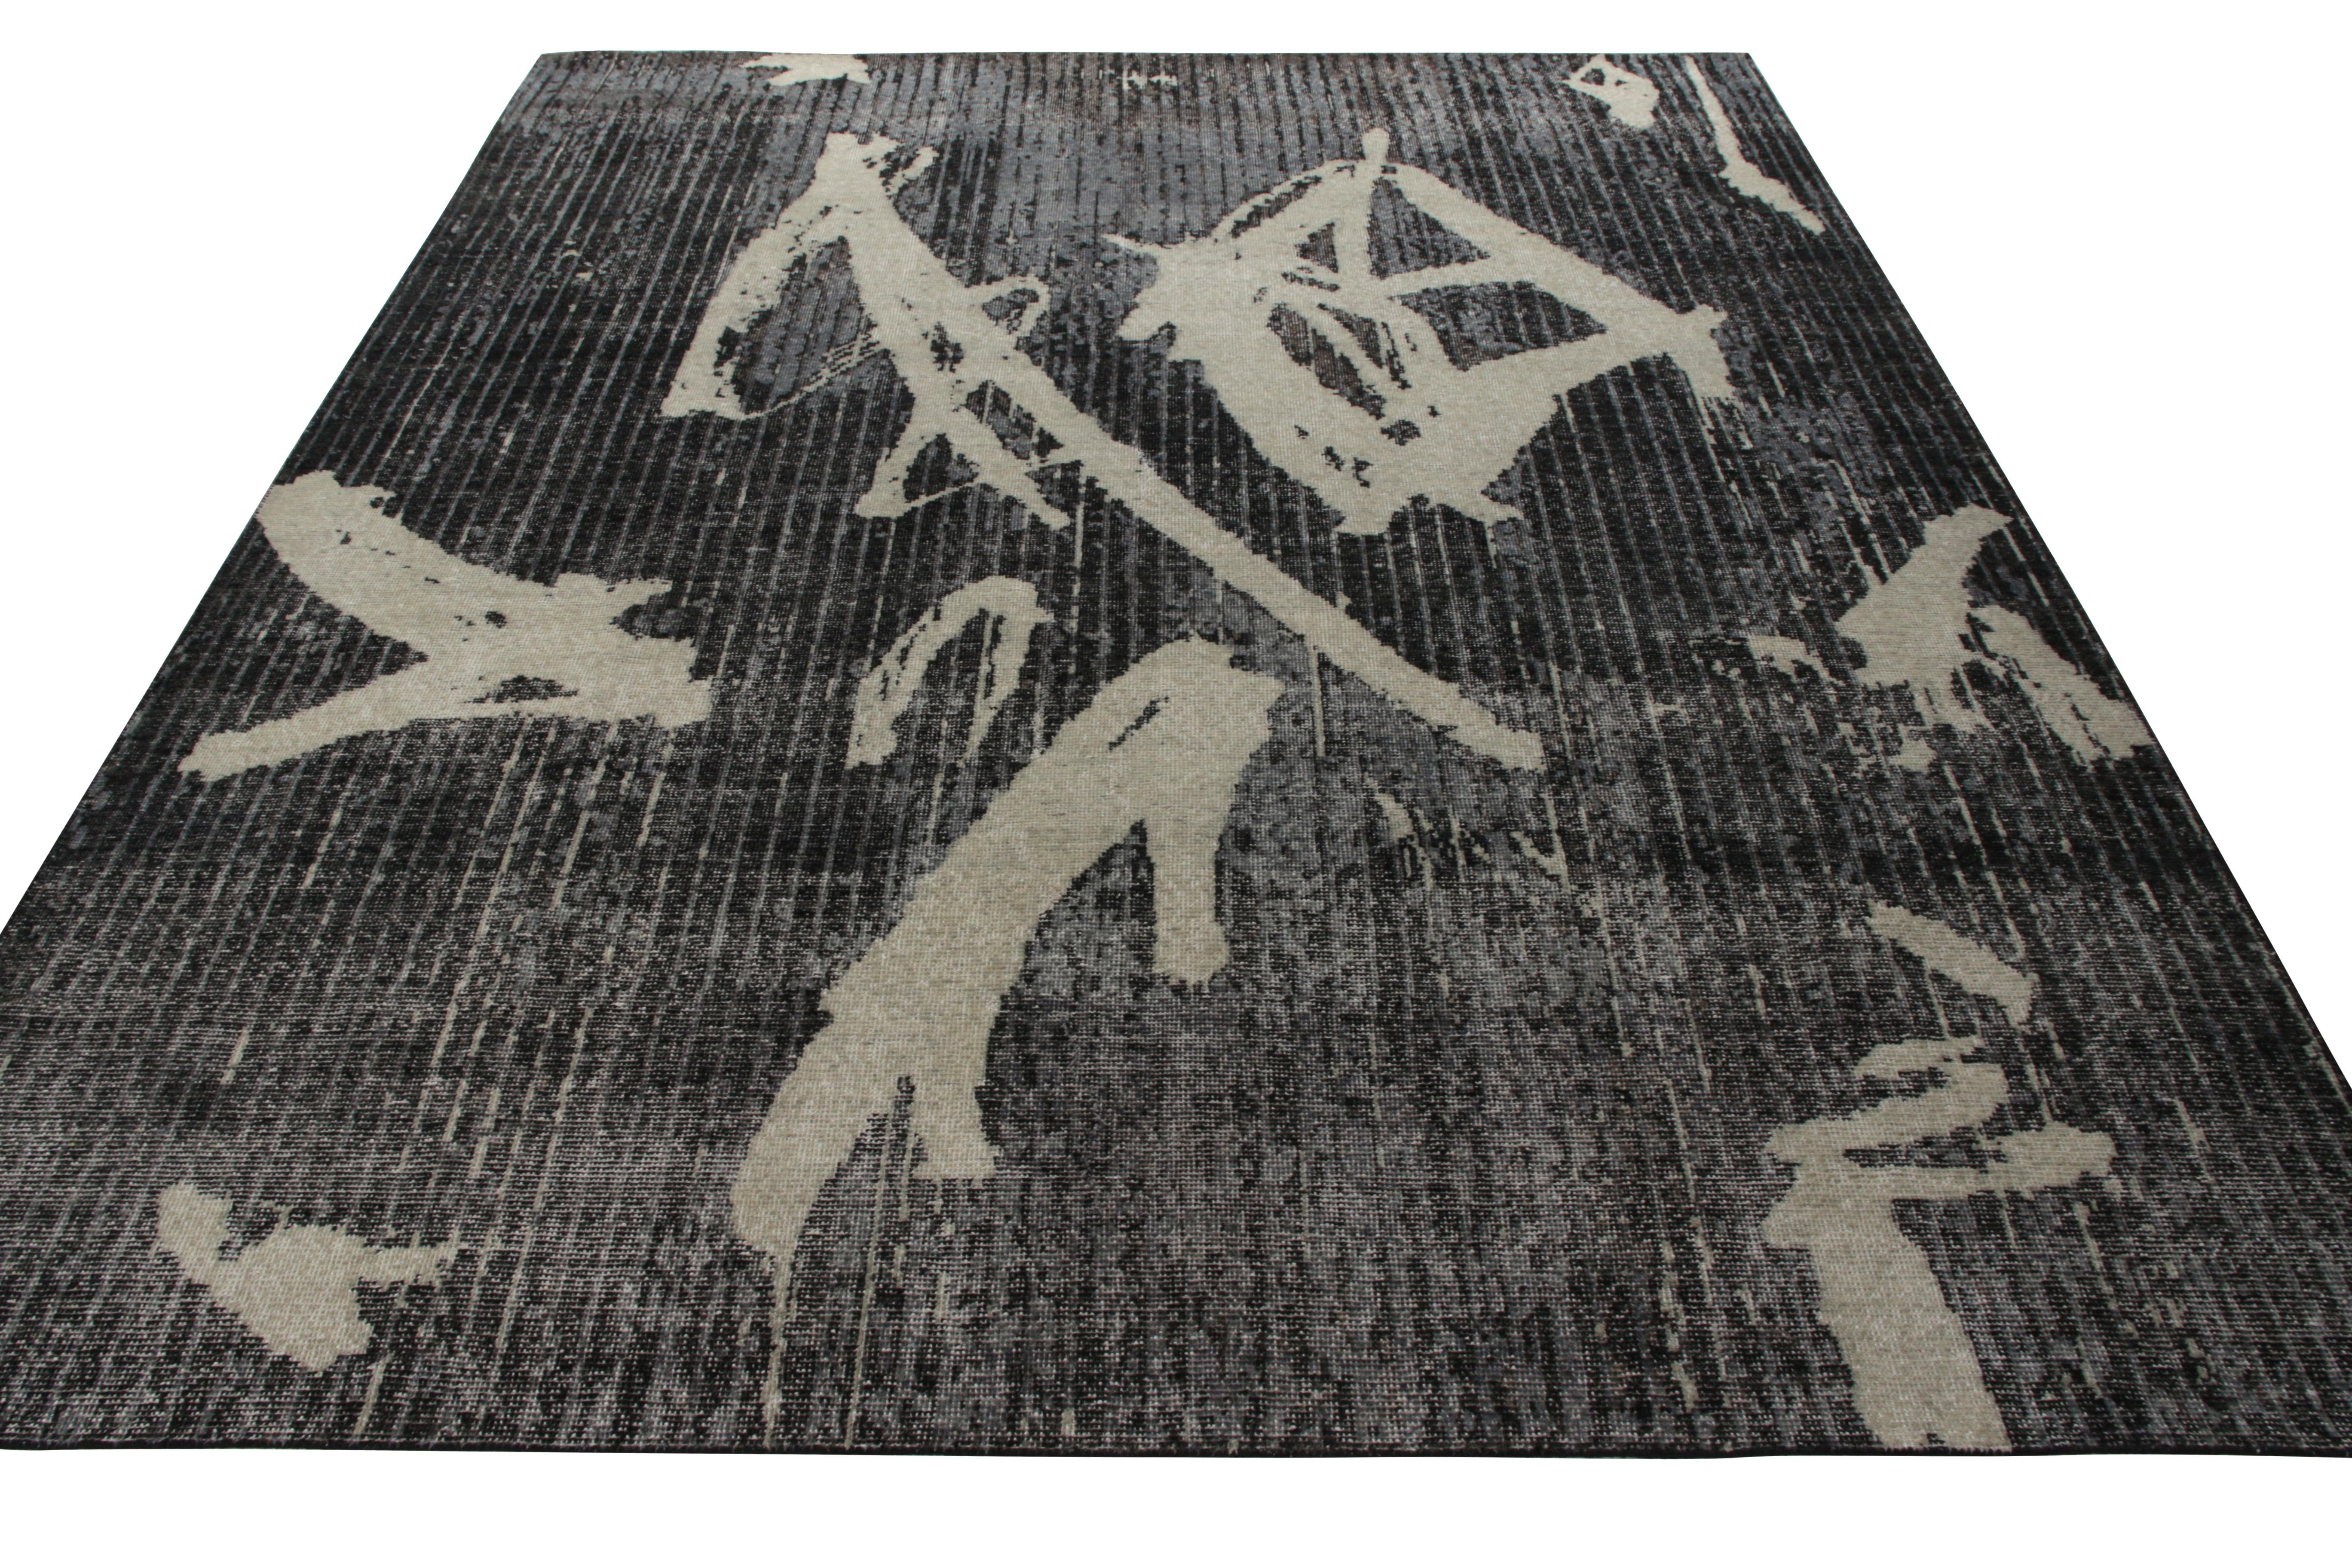 A hand-knotted 10x14 rug enjoying the amalgamation of a modern geometric pattern and distressed style, belonging to Rug & Kilim’s Homage Collection. The rug carries a shabby chic demeanor in light-dark shades of gray with black perfectly